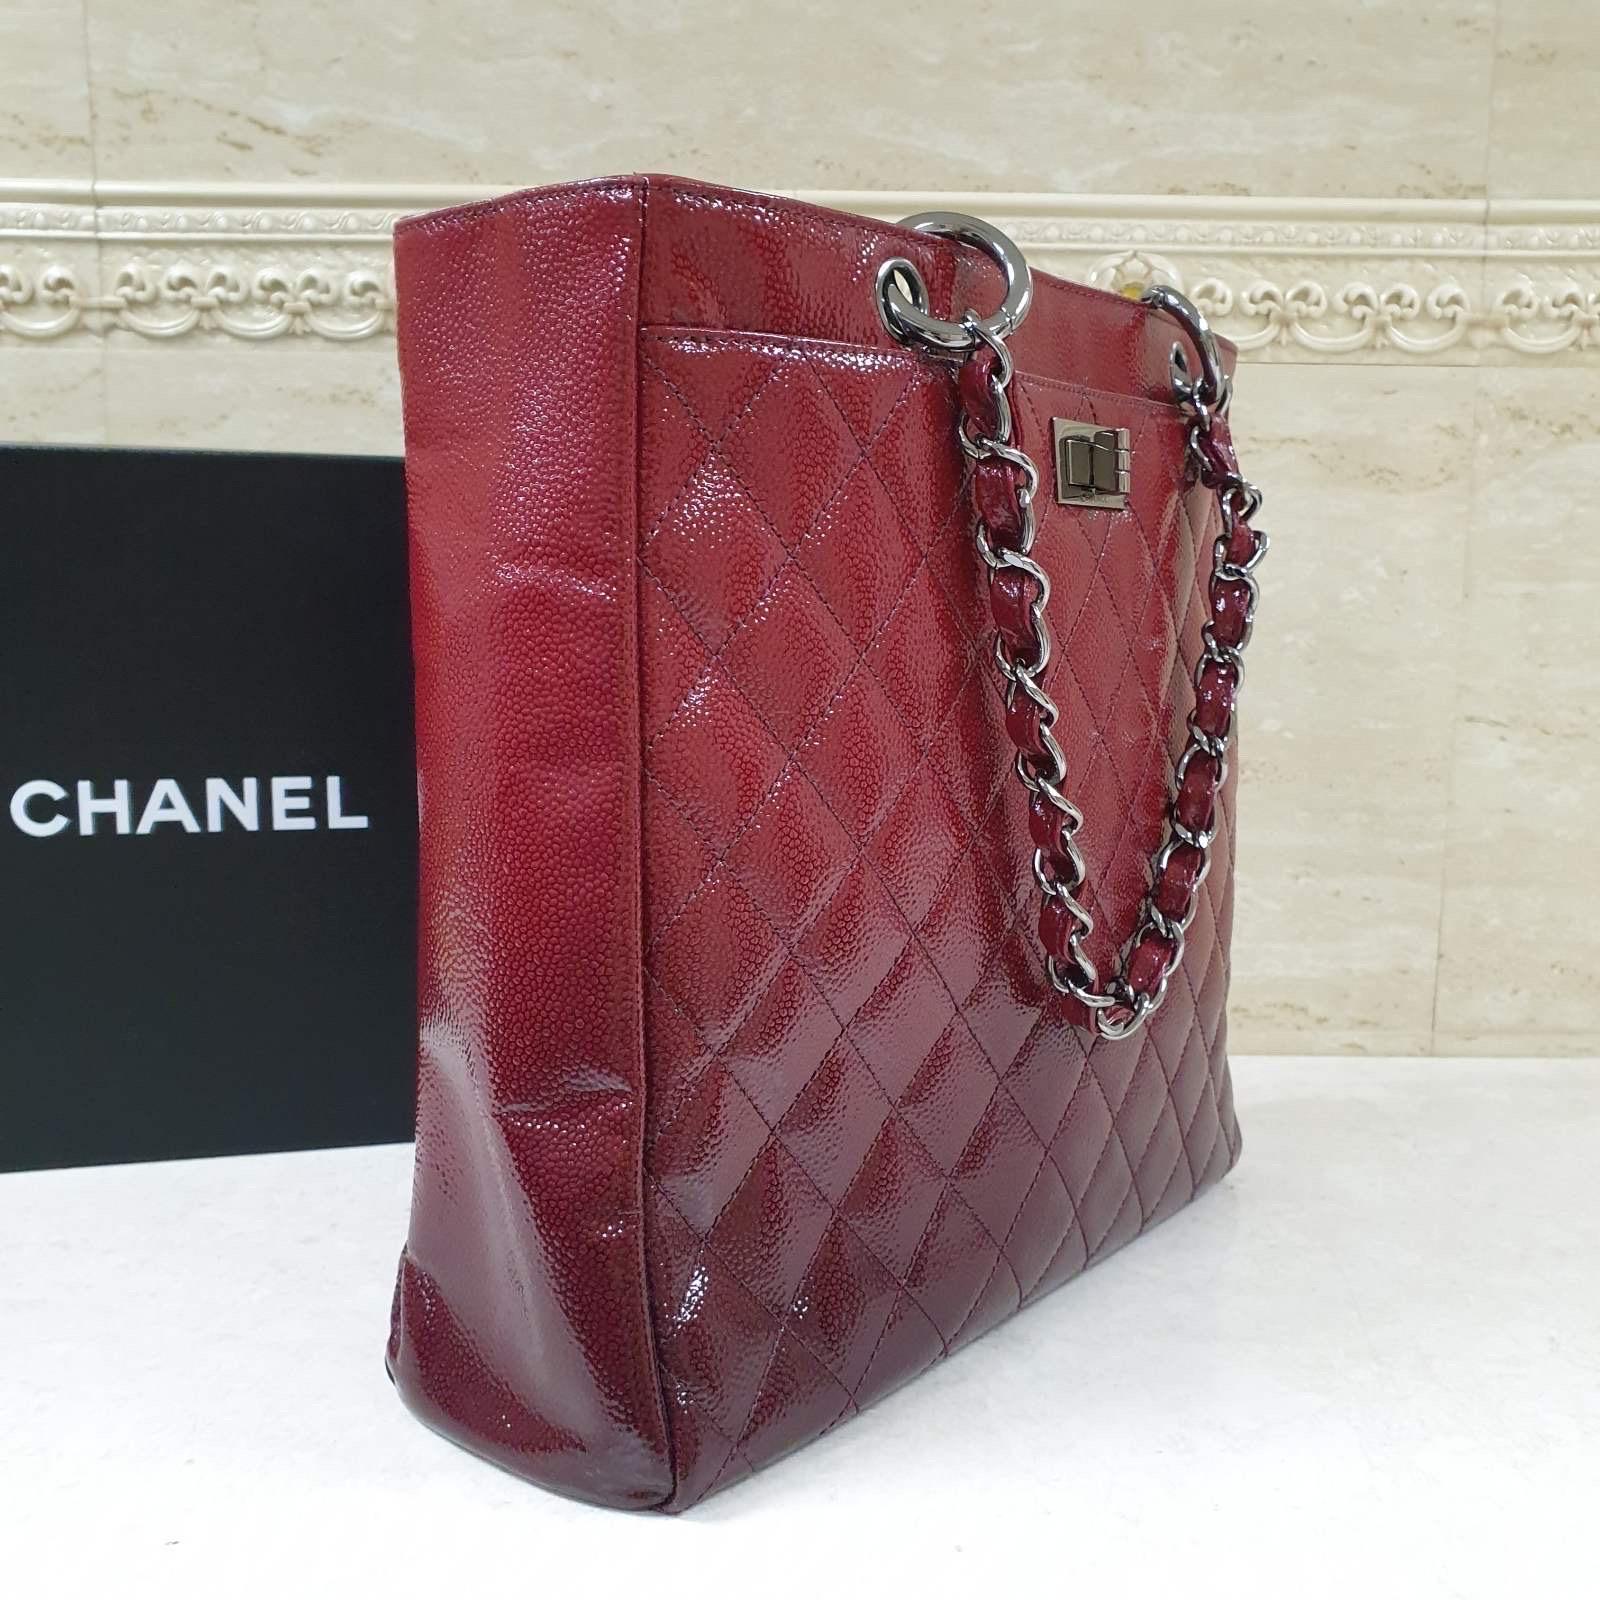 Chanel Burgundy Ombré Quilted Patent Grained Leather 2.55 Reissue Bag 5